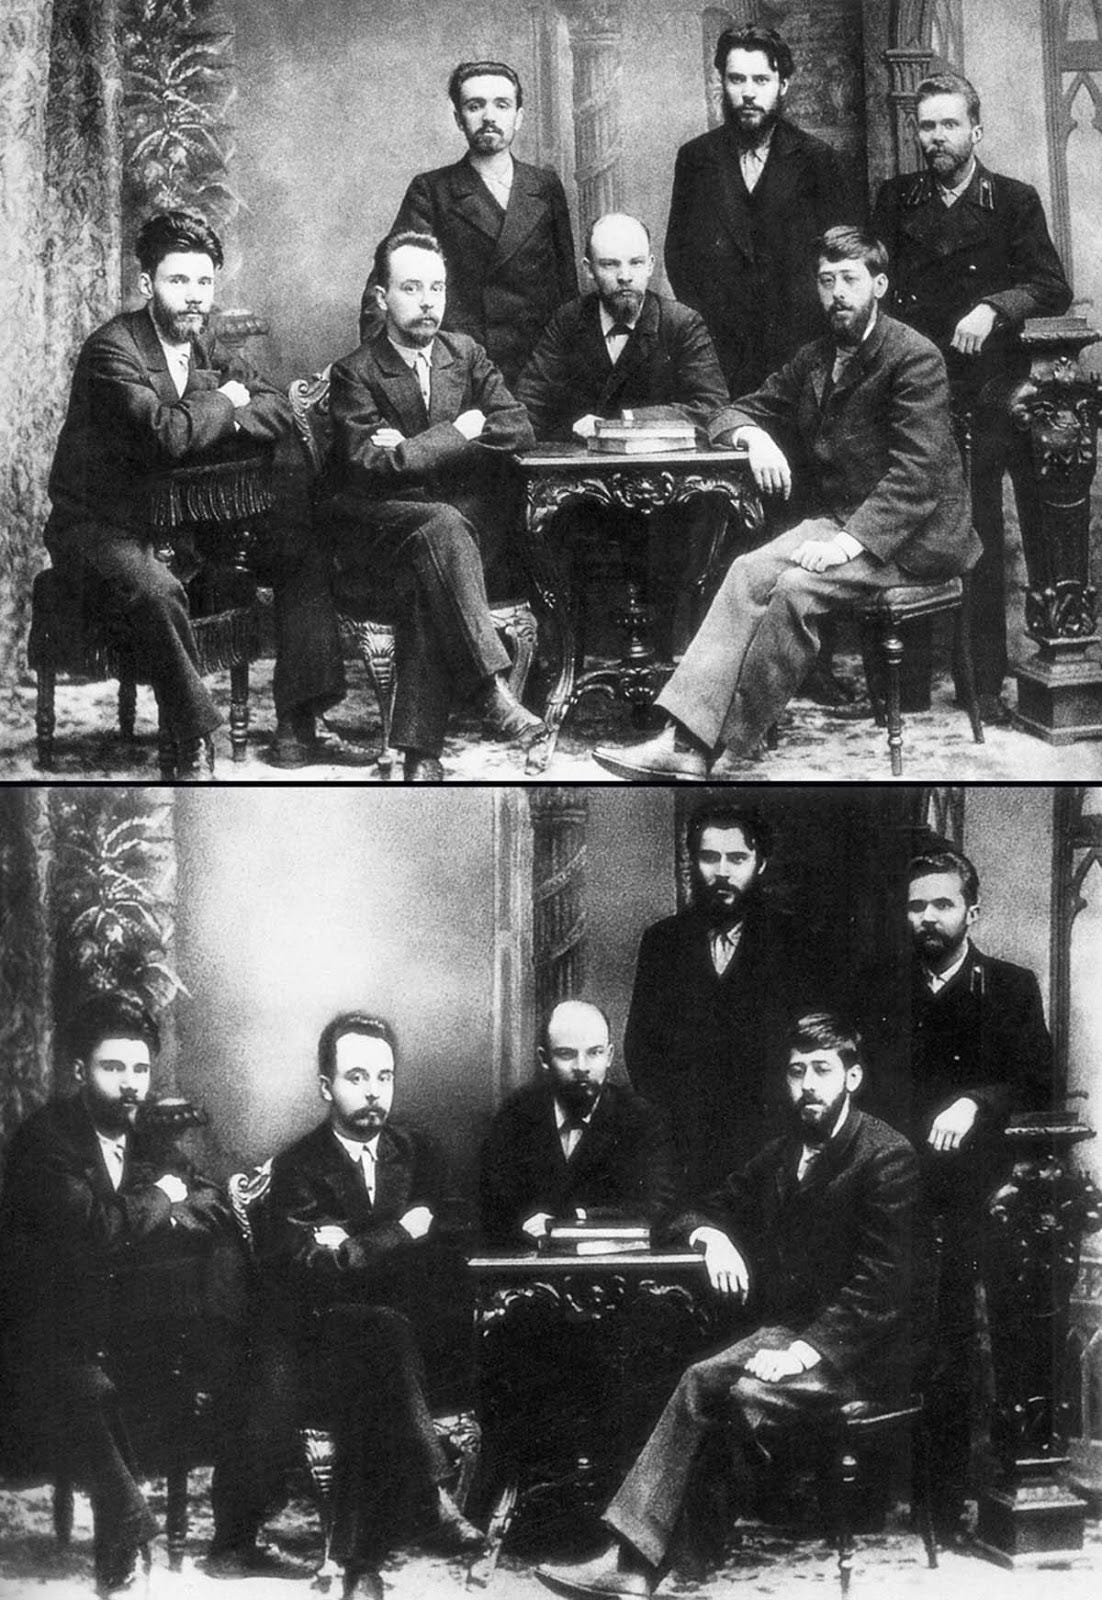 This historic picture showed young socialists in 1897 before some of them rose to power. You’ll recognize a young Vladimir Lenin (in the middle) – of course, he kept his place. Alexander Malchenko (standing, on the left) was not so lucky: in 1930 he was accused of being a spy, executed, and replaced with a white spot.